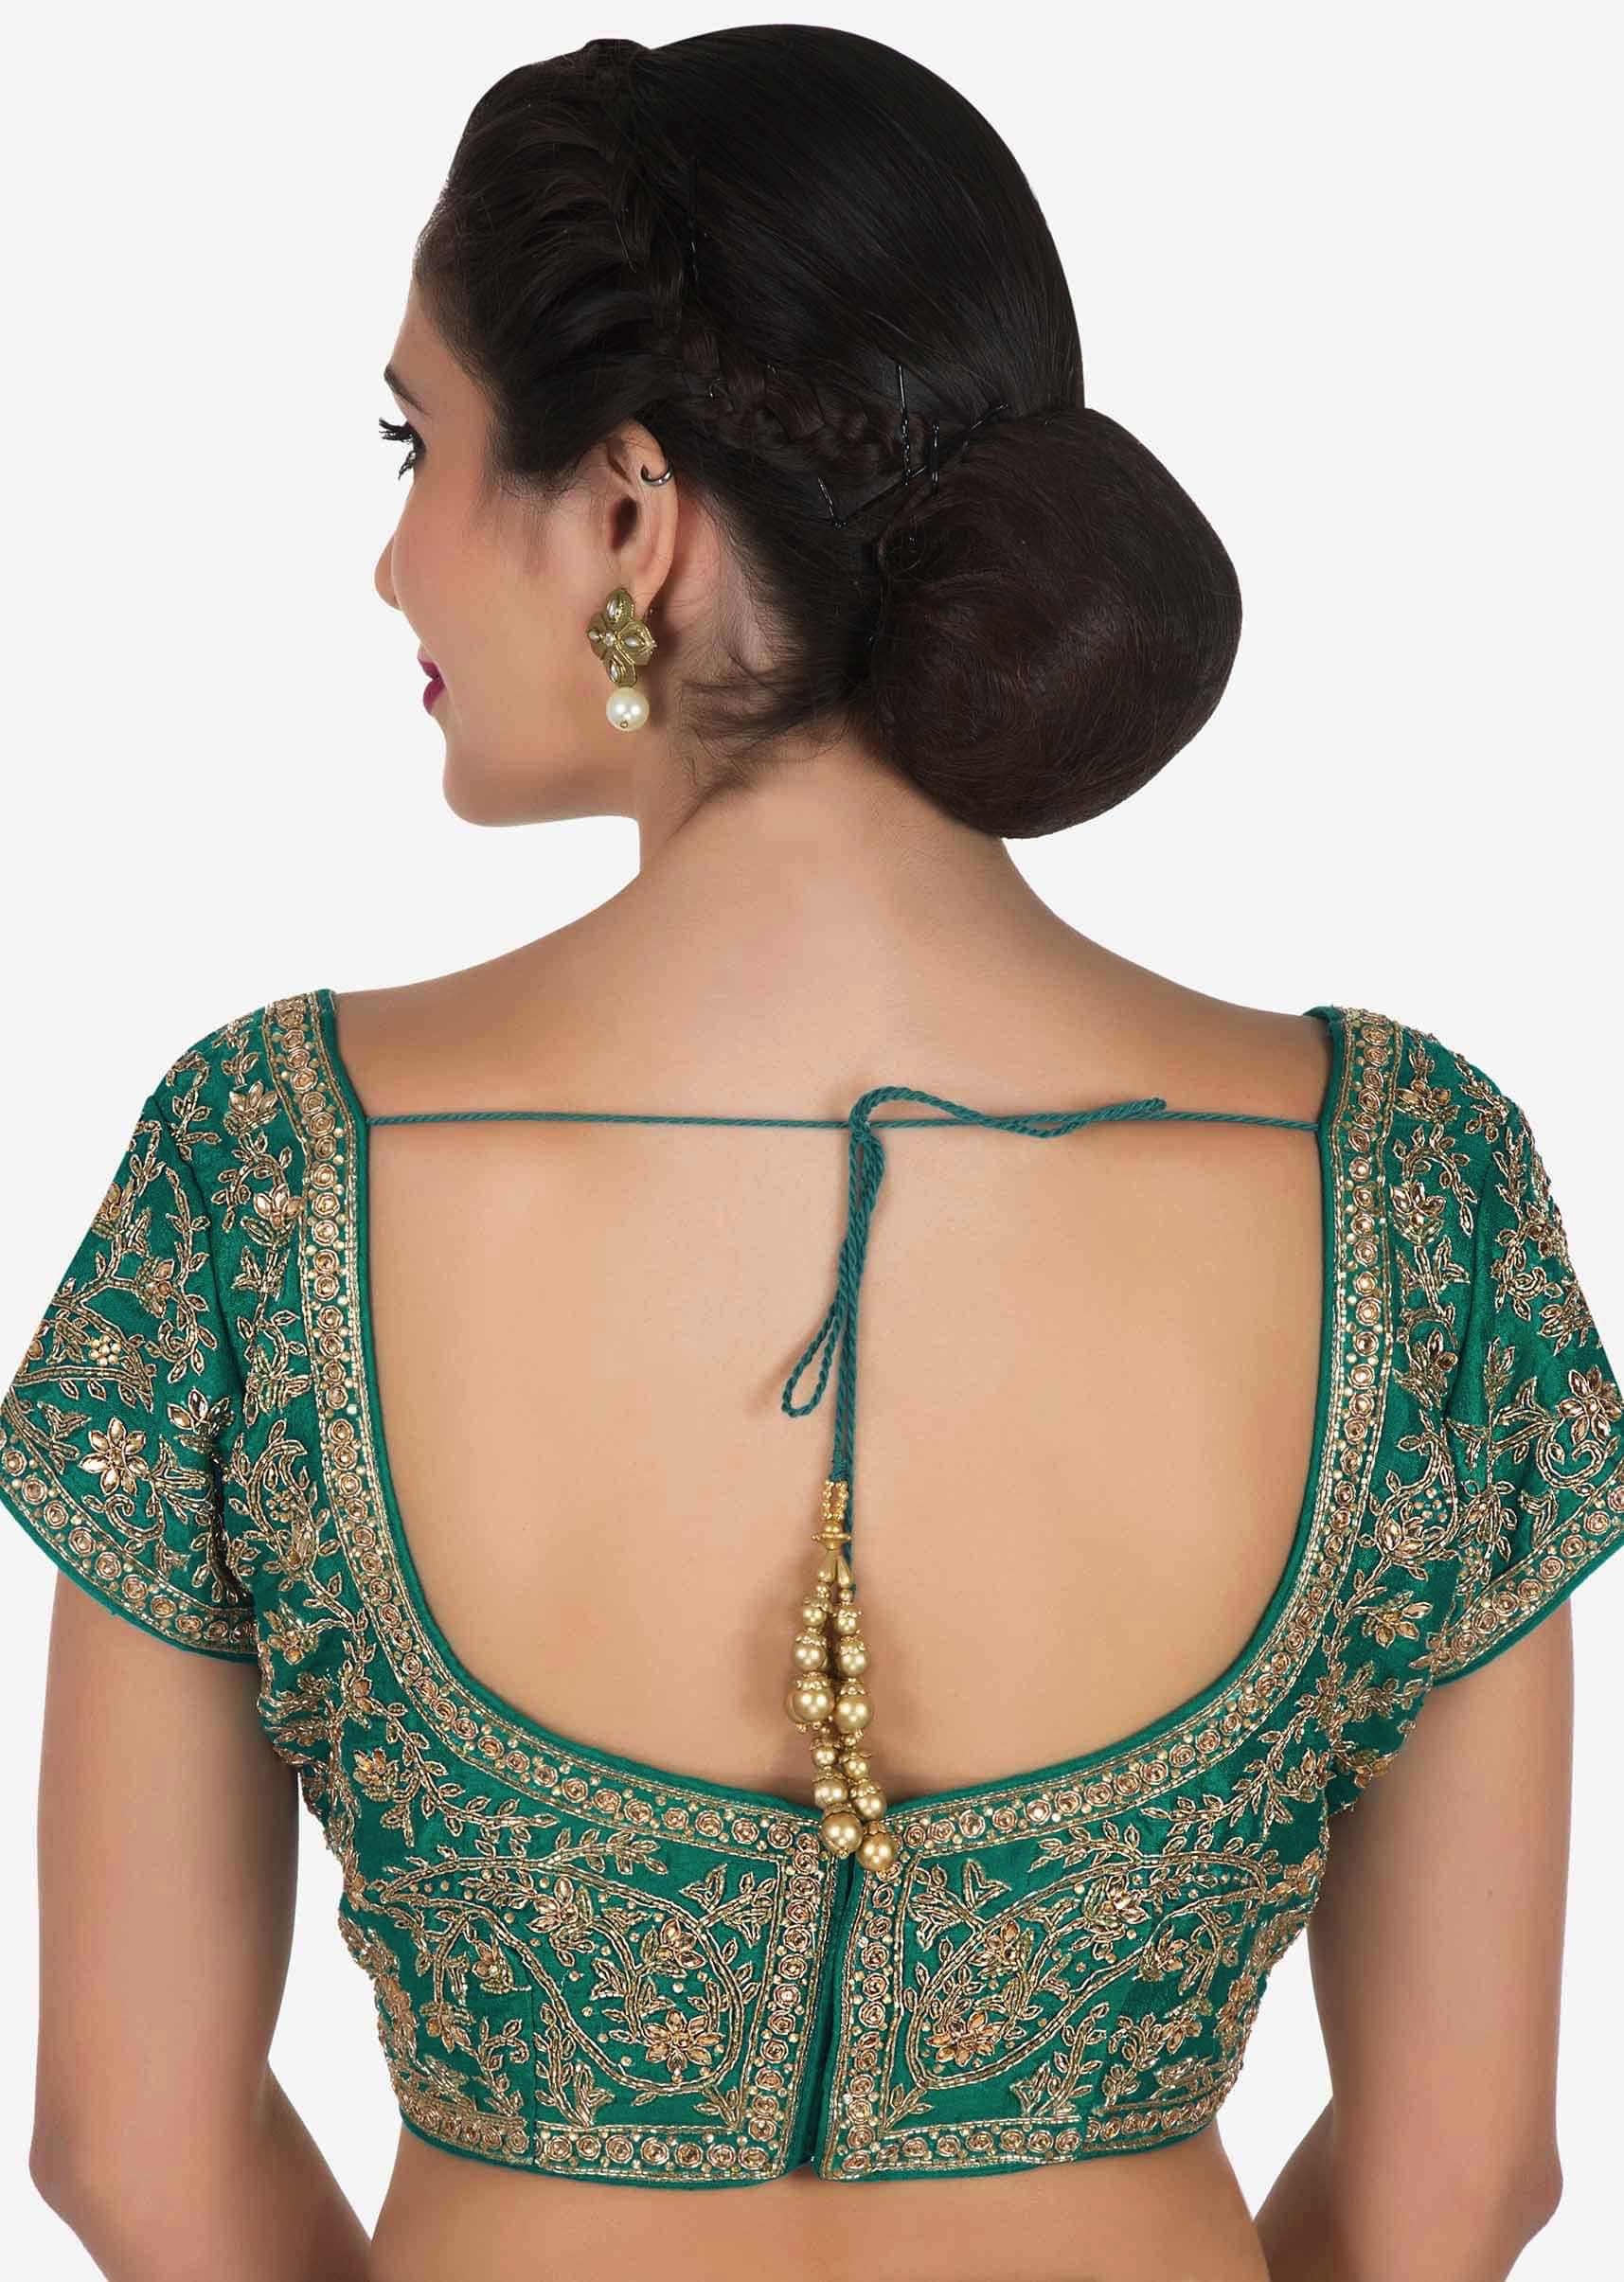 Cream Saree With Dark Green Blouse Crafted In Moti And Cut Dana Embroidery Work Online - Kalki Fashion